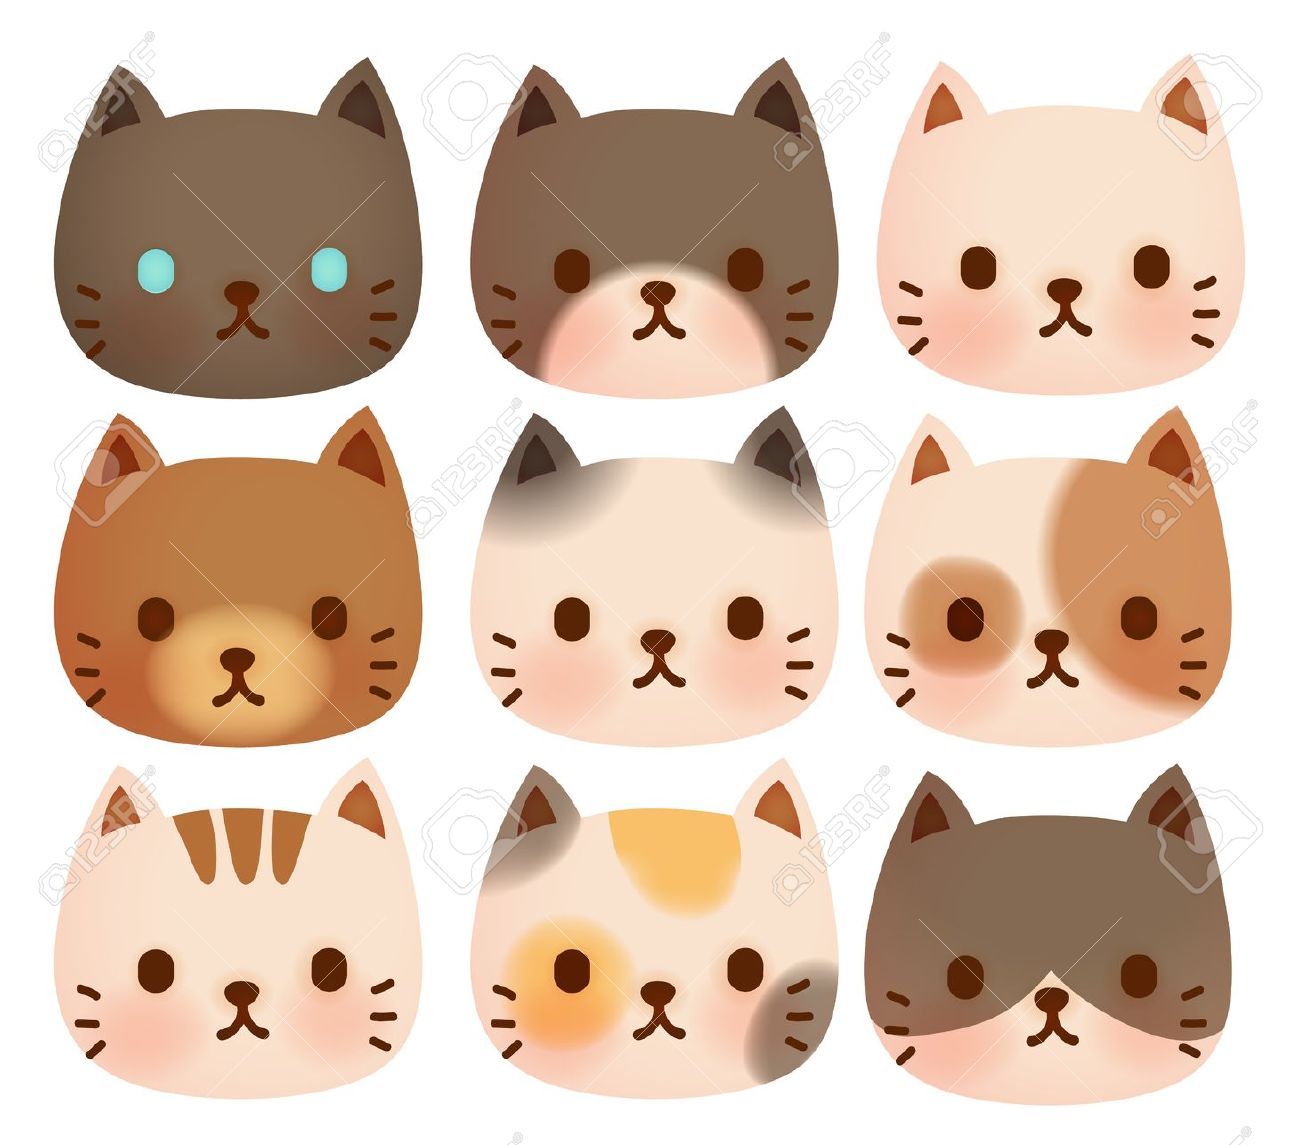 Cat Face Stock Vector Illustration And Royalty Free Cat Face